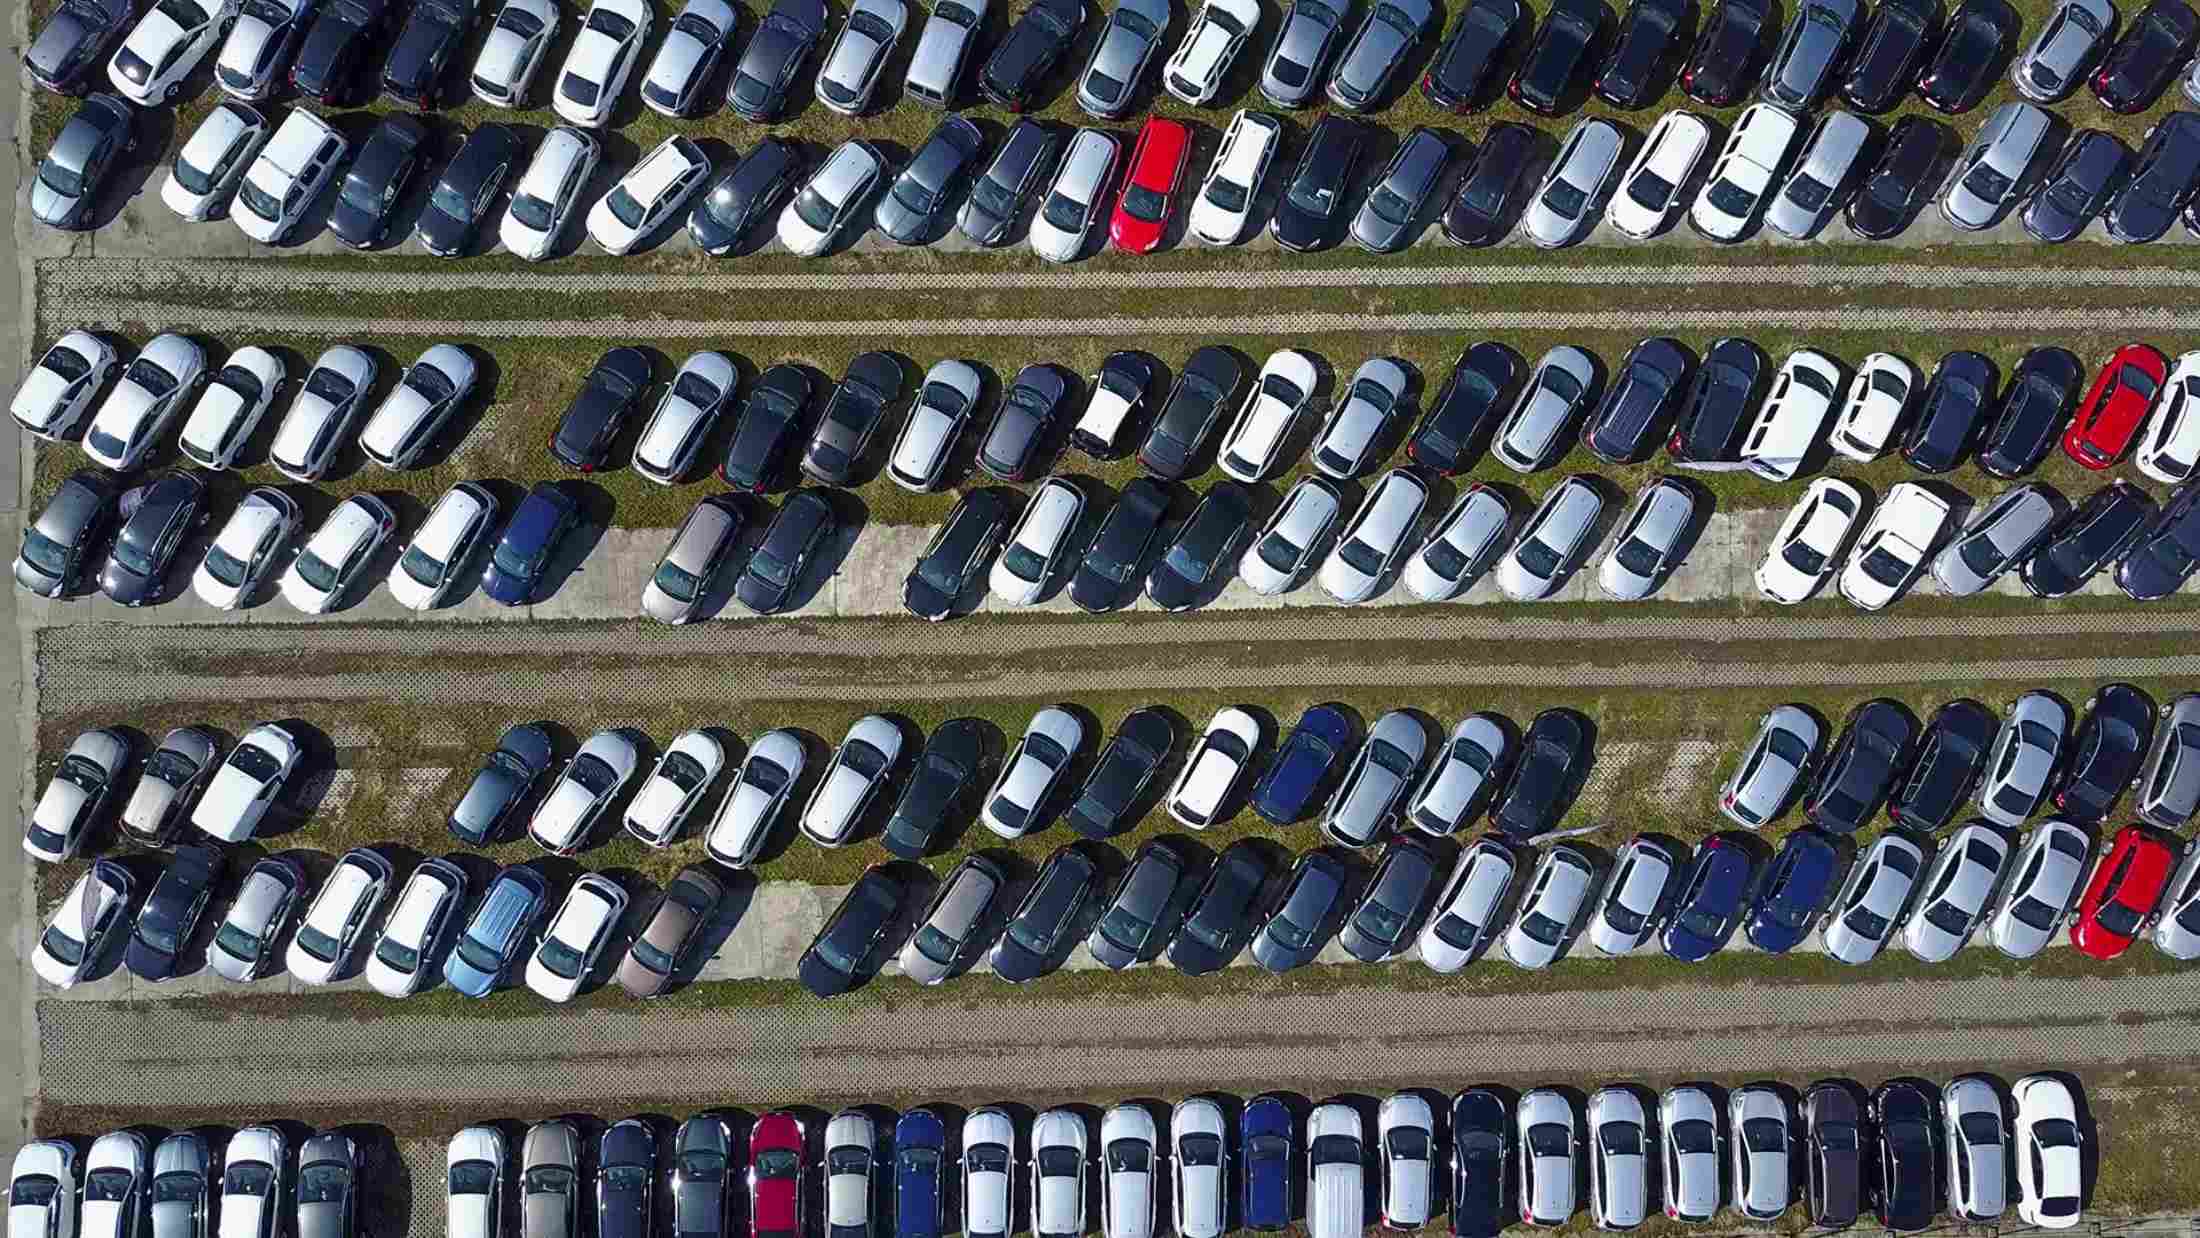 Used cars in a car park